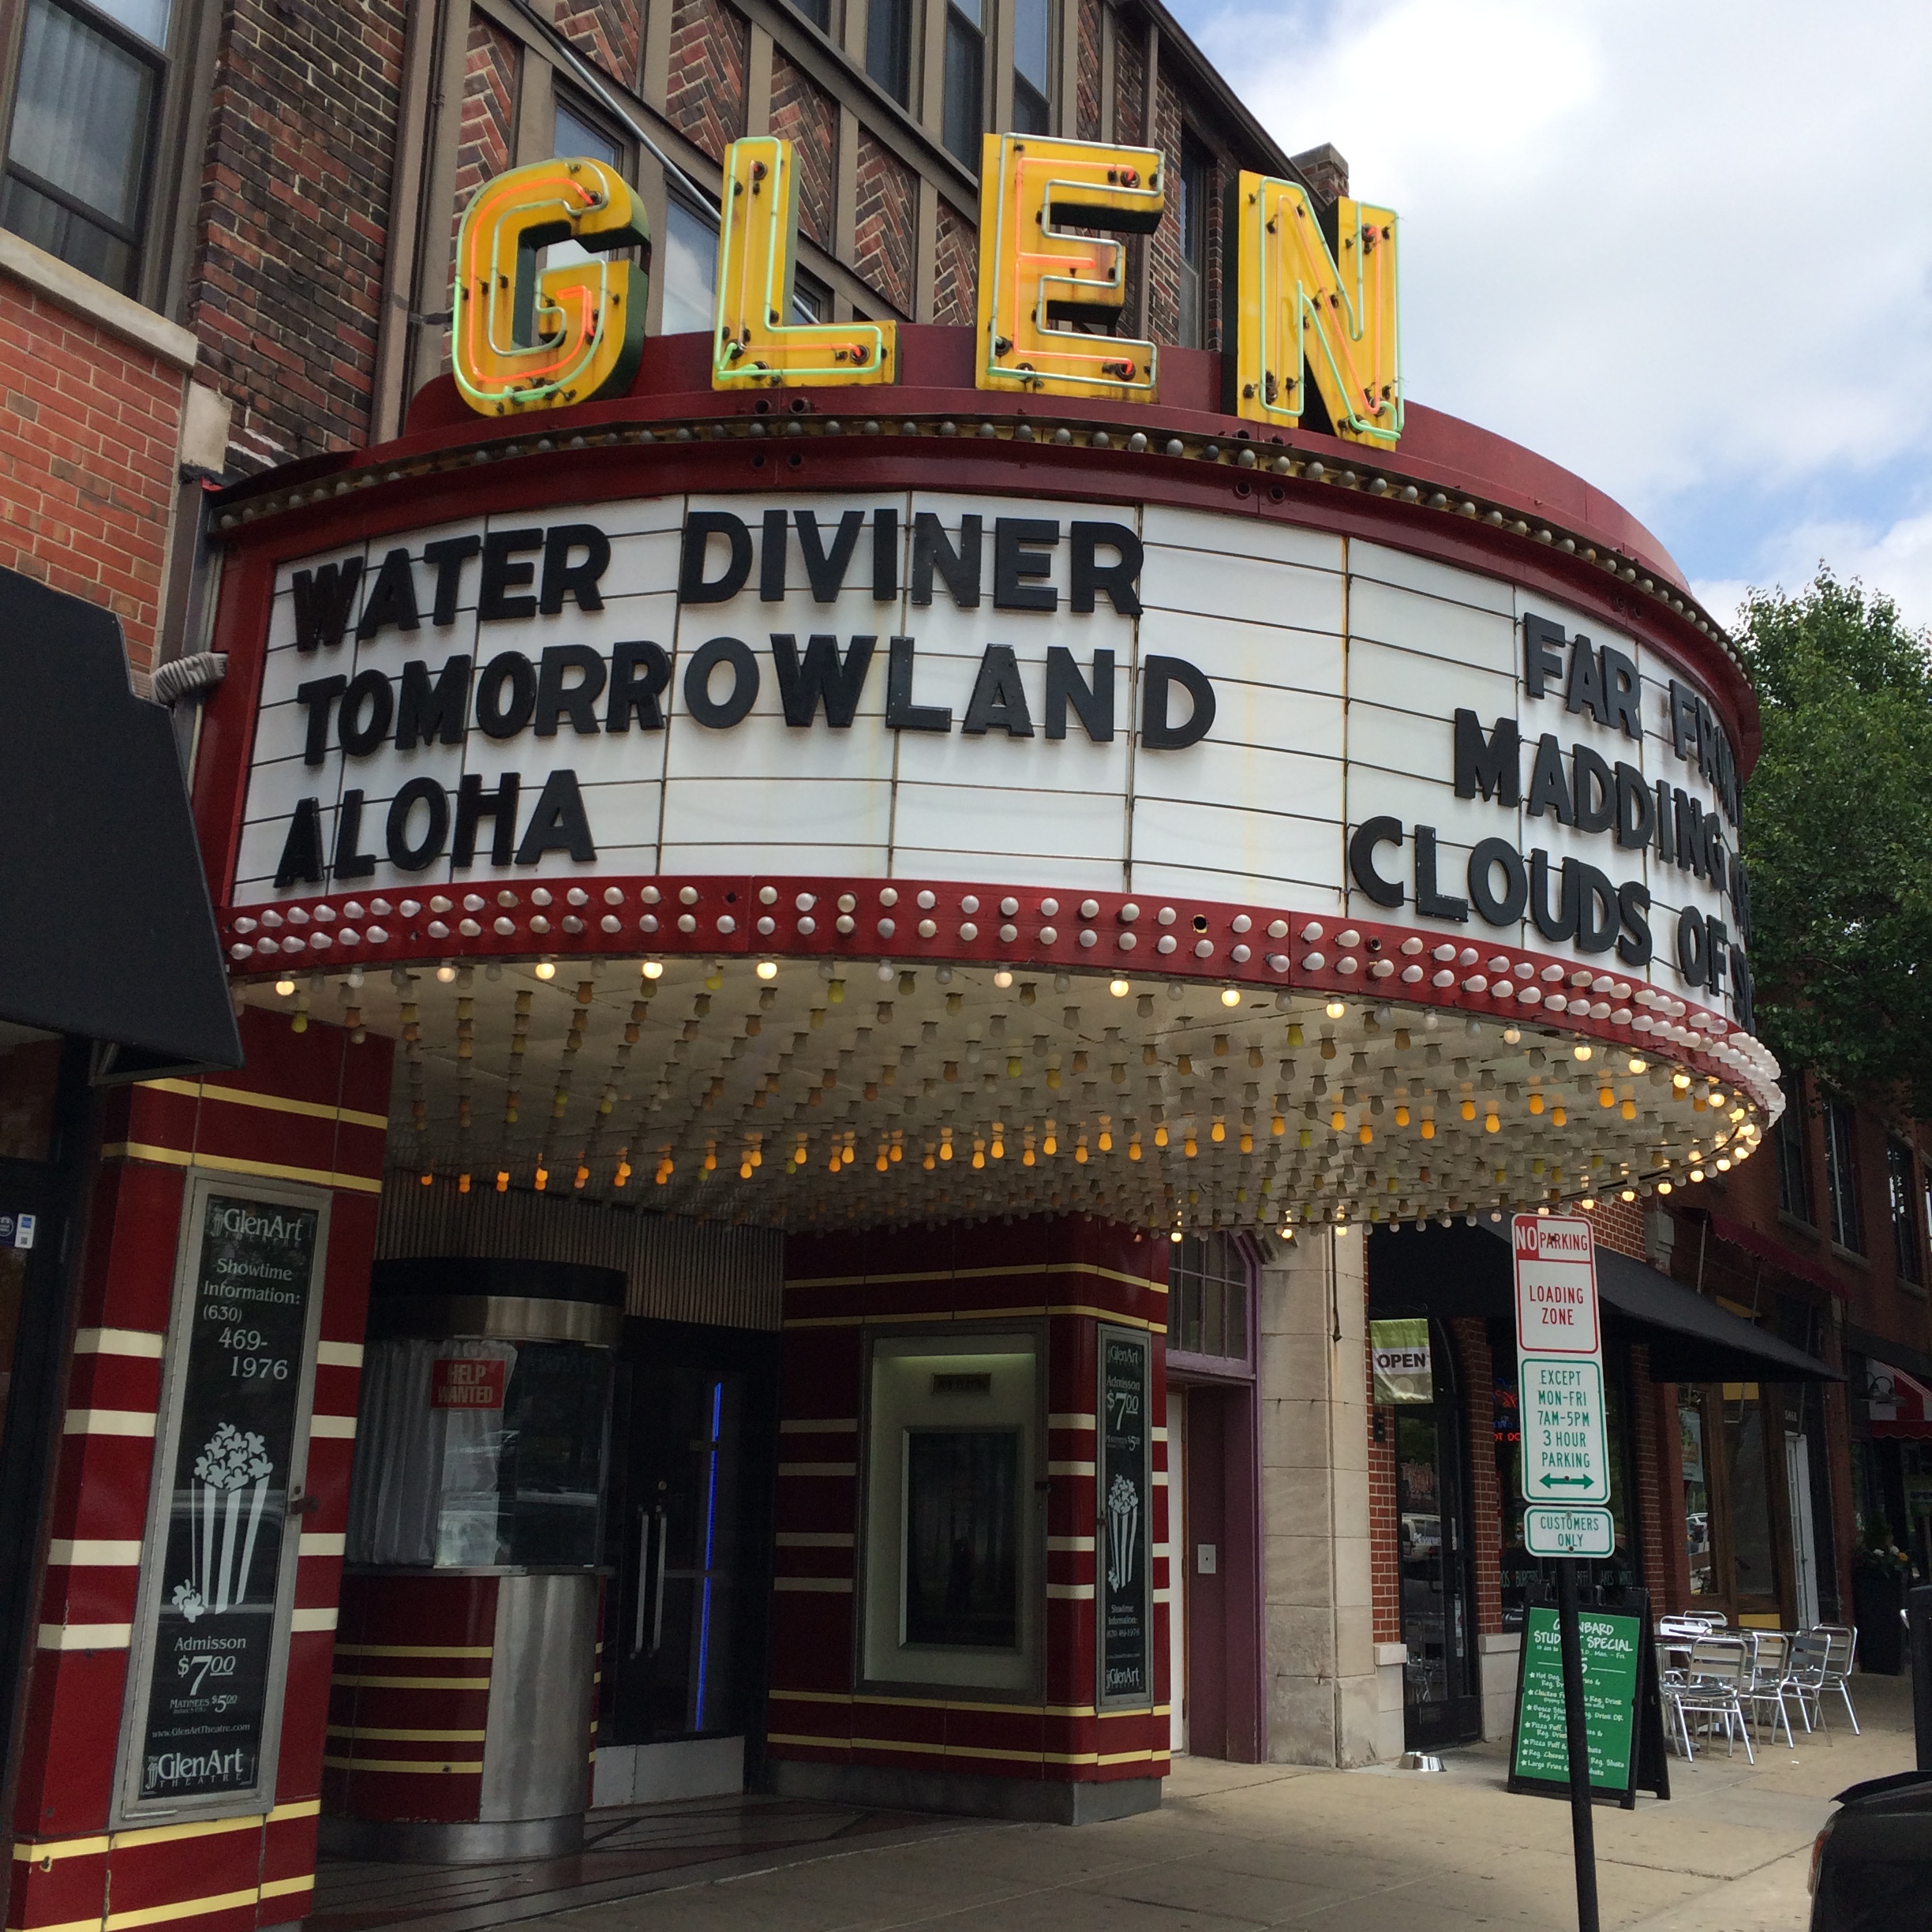 The historical movie theater in downtown Glen Ellyn (right down the street from KC)